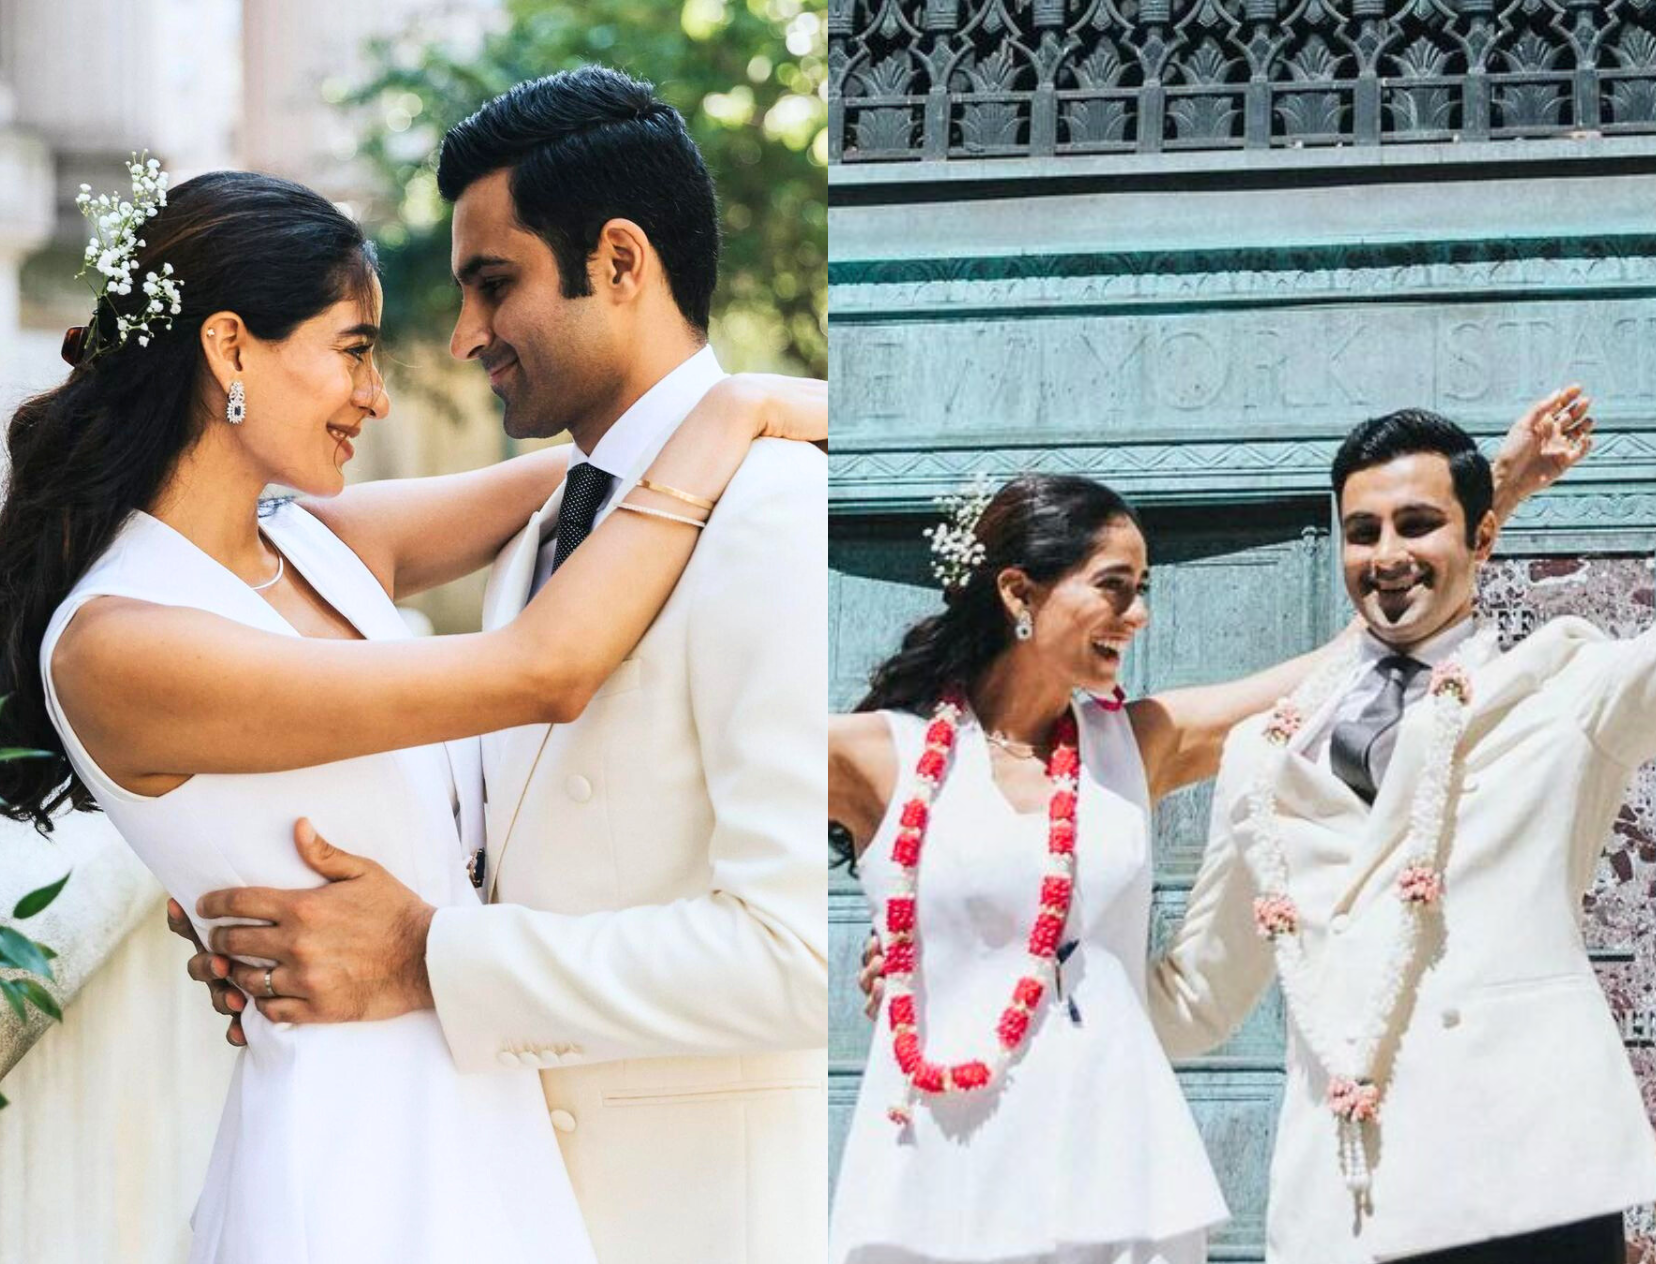 This Supermodel Wore A Pantsuit For Her Shaadi &amp; We Love The Chill Vibe!